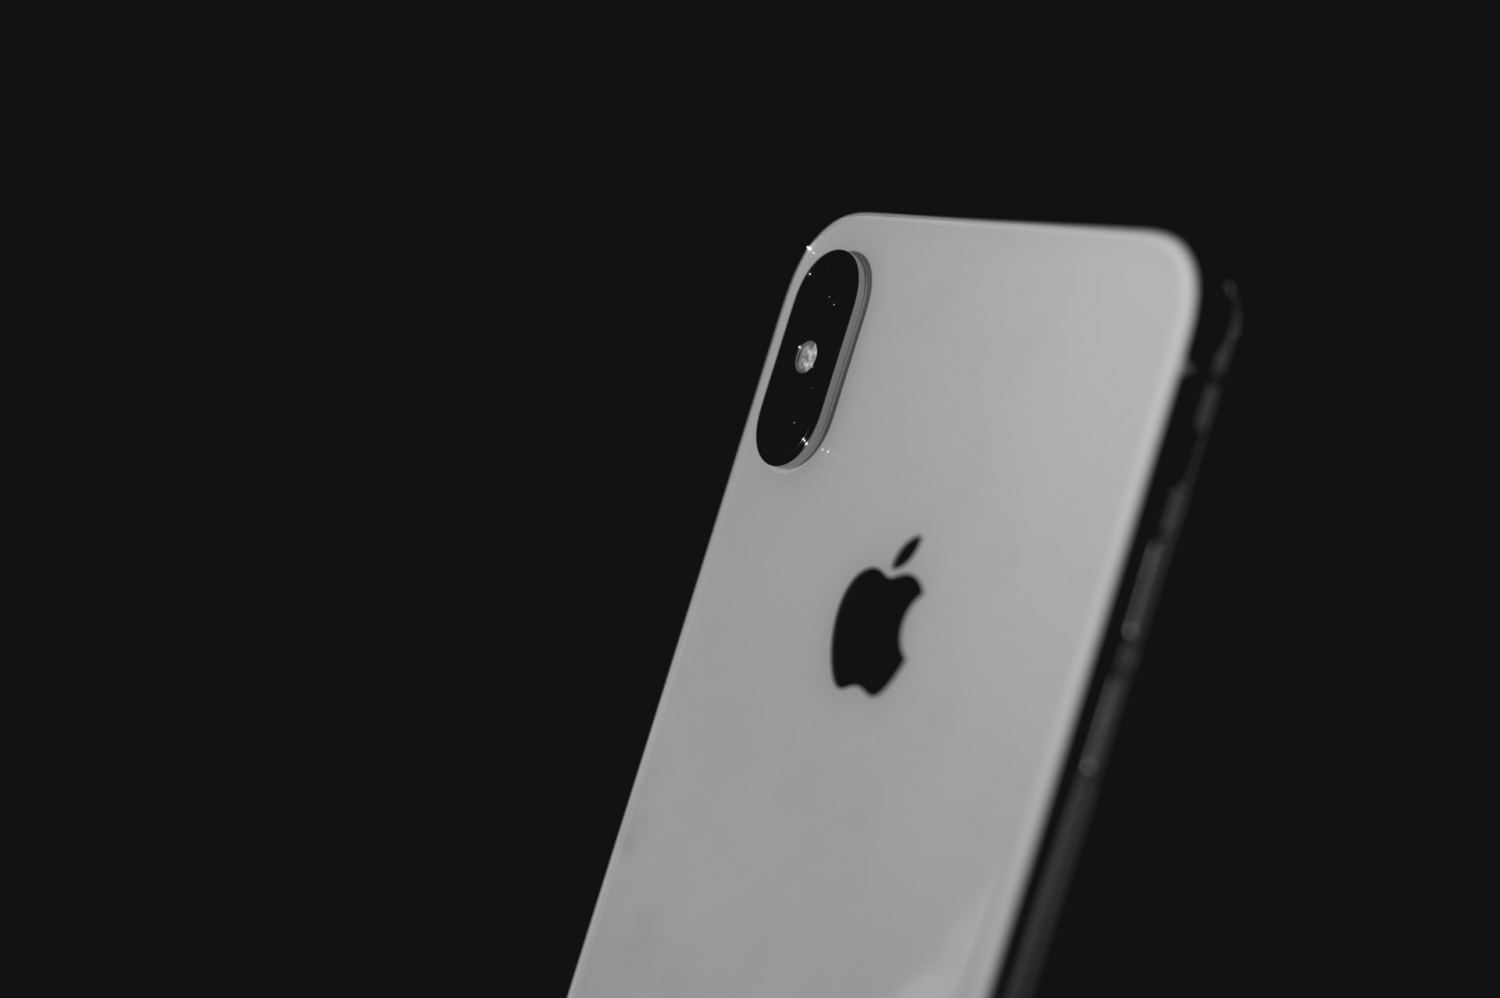 iPhone 13 Pro Leak Teases New Screen Display With 120 Hz Refresh Rates: Specs, Release Date and More Updates